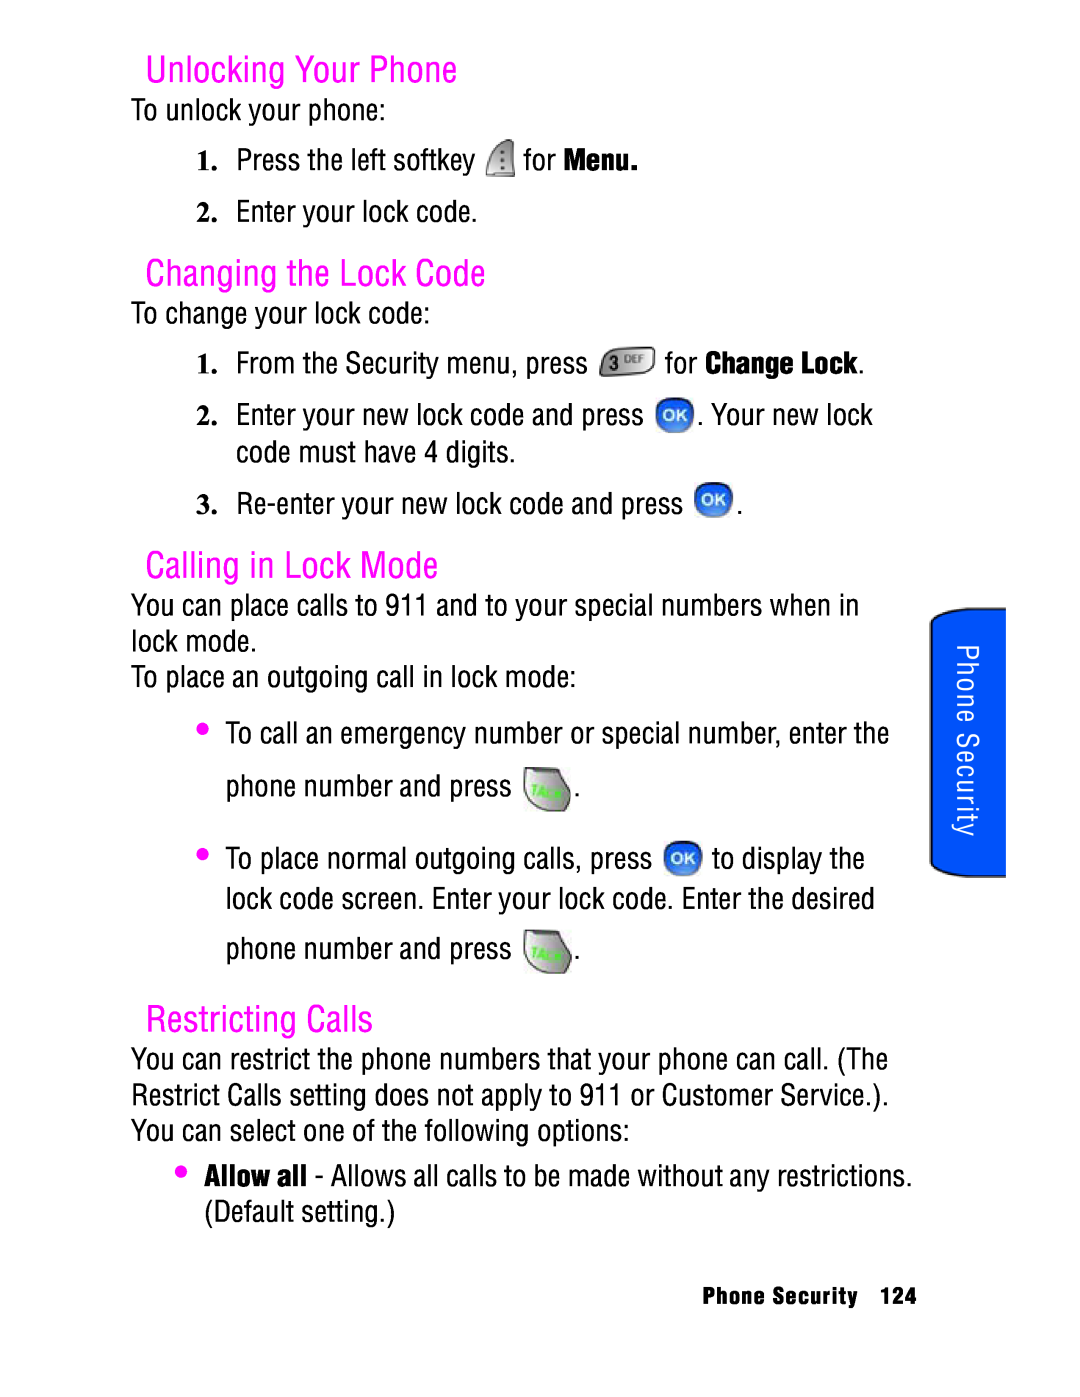 Samsung SPH-a740 Unlocking Your Phone, Changing the Lock Code, Calling in Lock Mode, Restricting Calls, Phone Security 